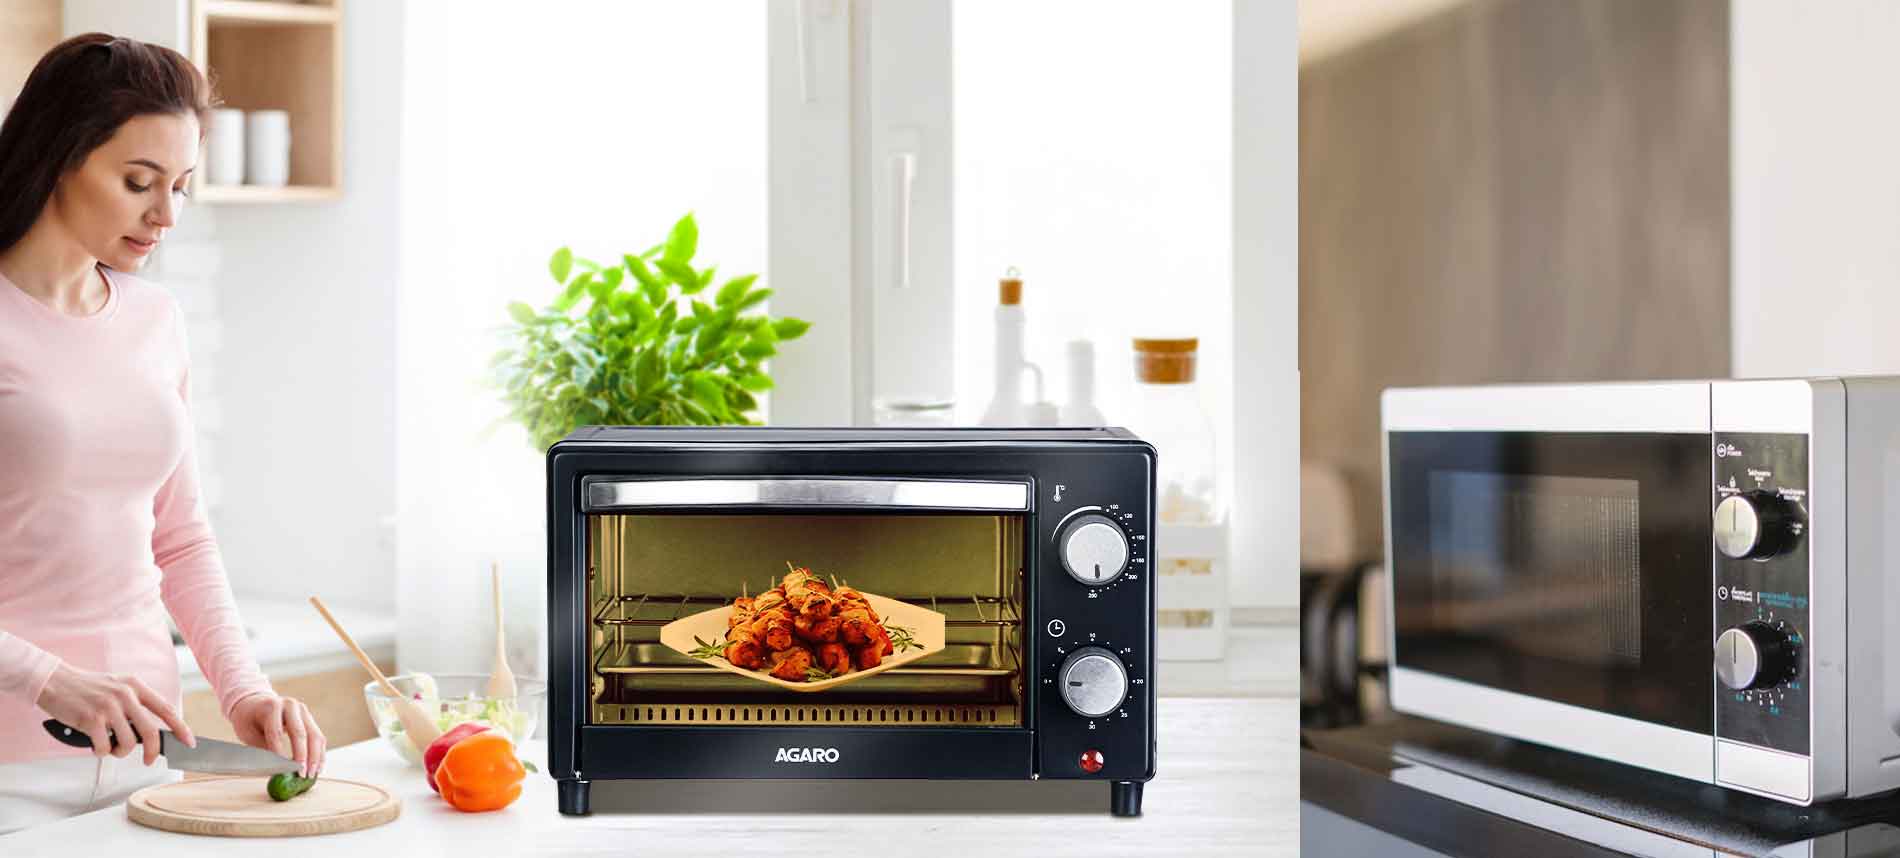 Toaster Ovens vs. Microwaves: Which is Better?